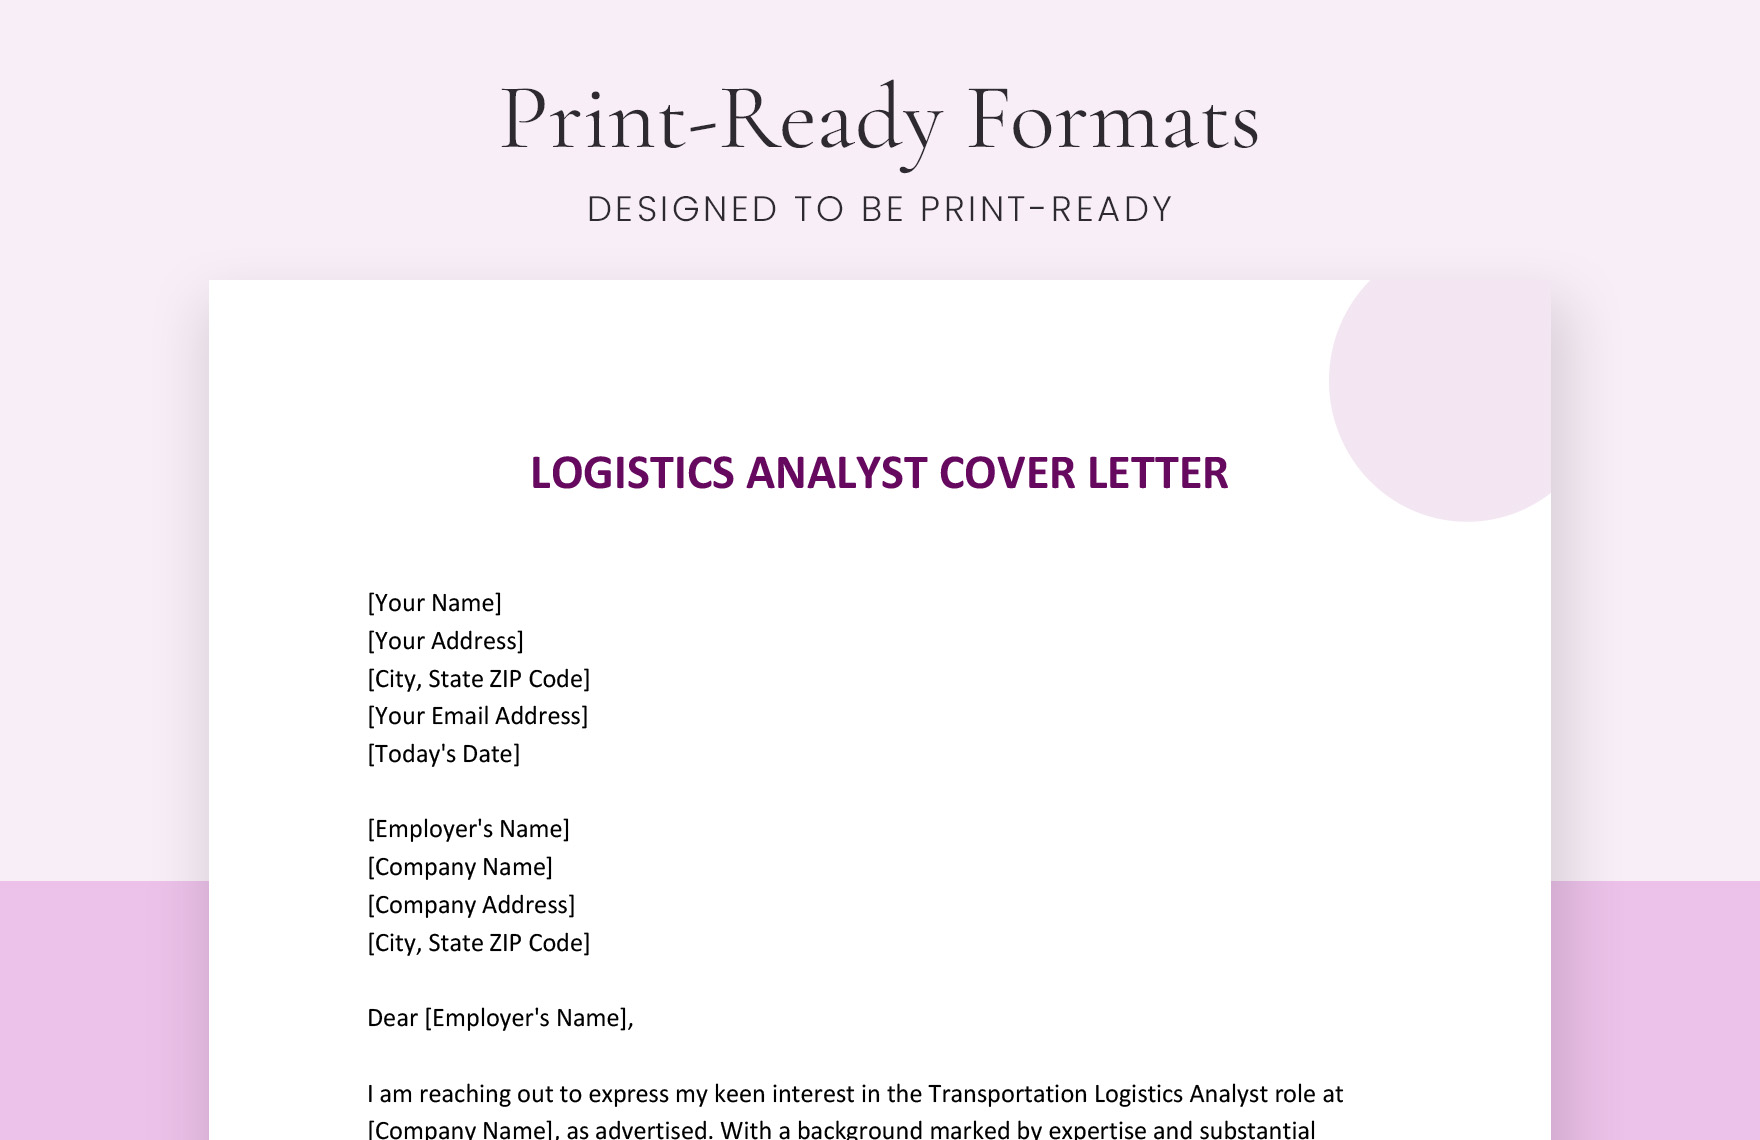 Logistics Analyst Cover Letter